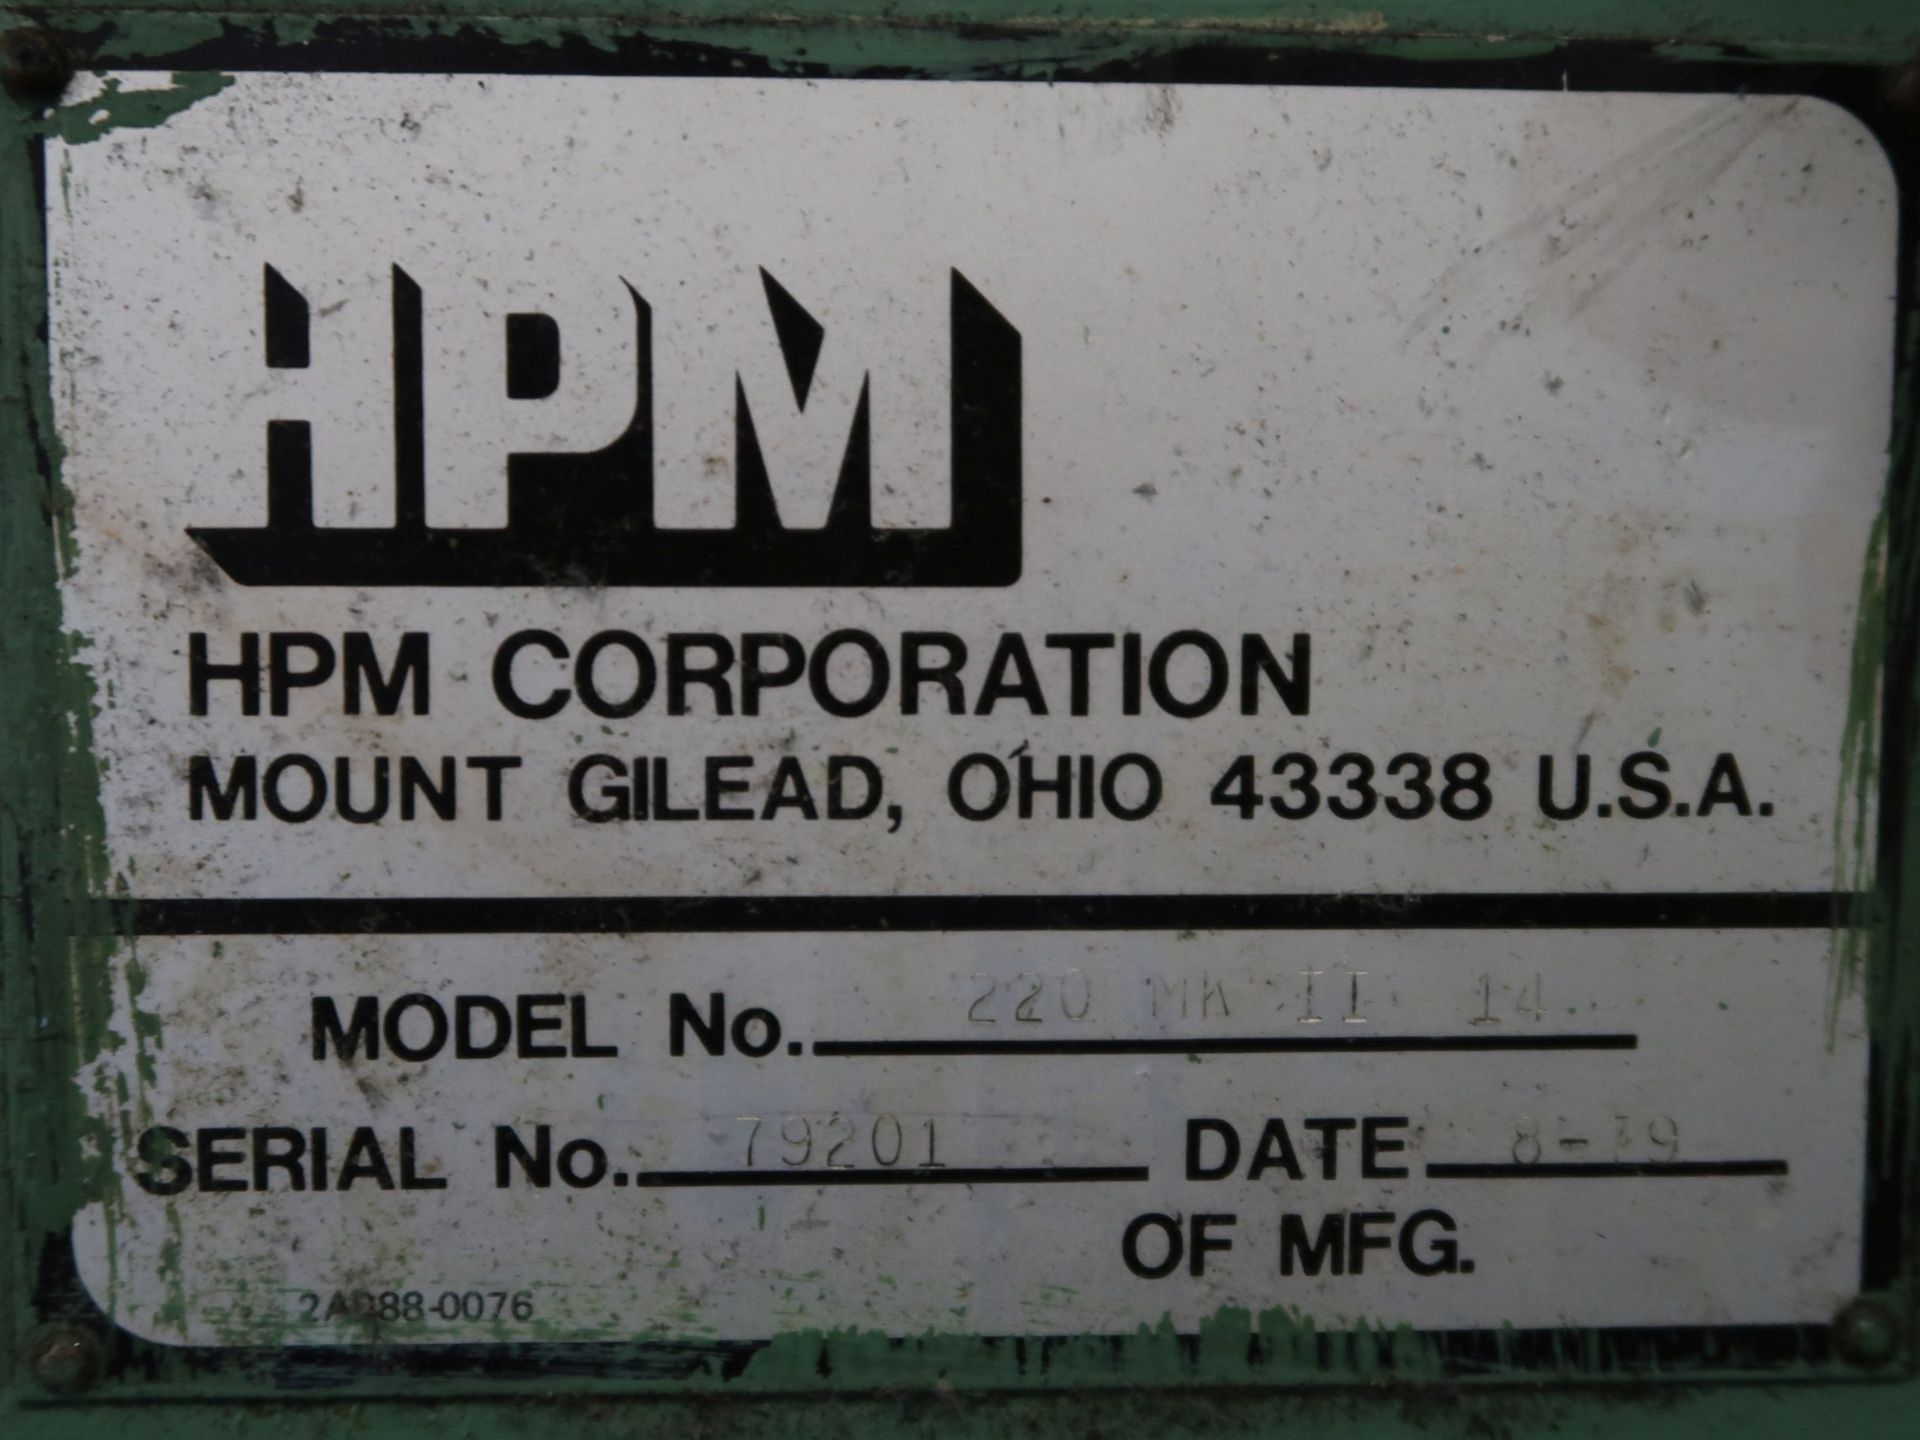 220 TON X 14 OZ. HPM MODEL 220MK-11-14 HYDRAULIC CLAMP INJECTION MOLDING MACHINE; S/N 79201, CON-AIR - Image 23 of 27